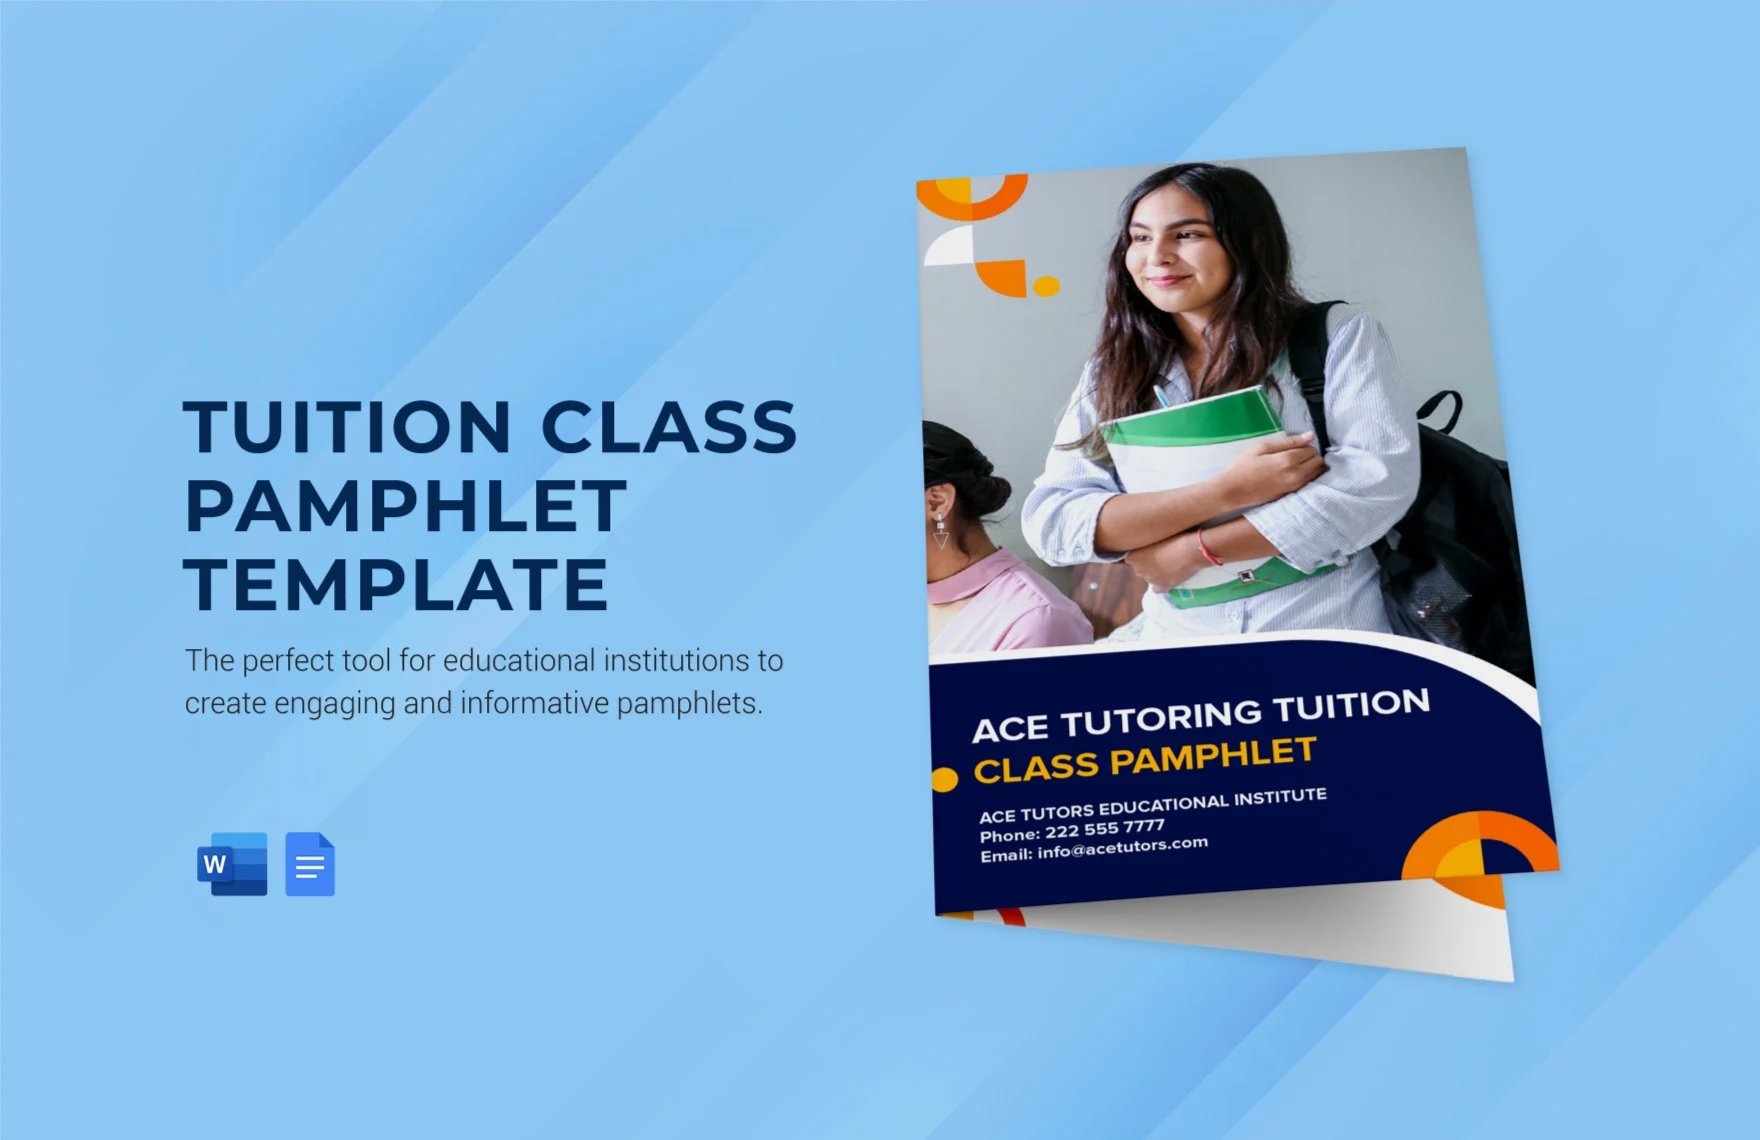 Tuition Class Pamphlet Template